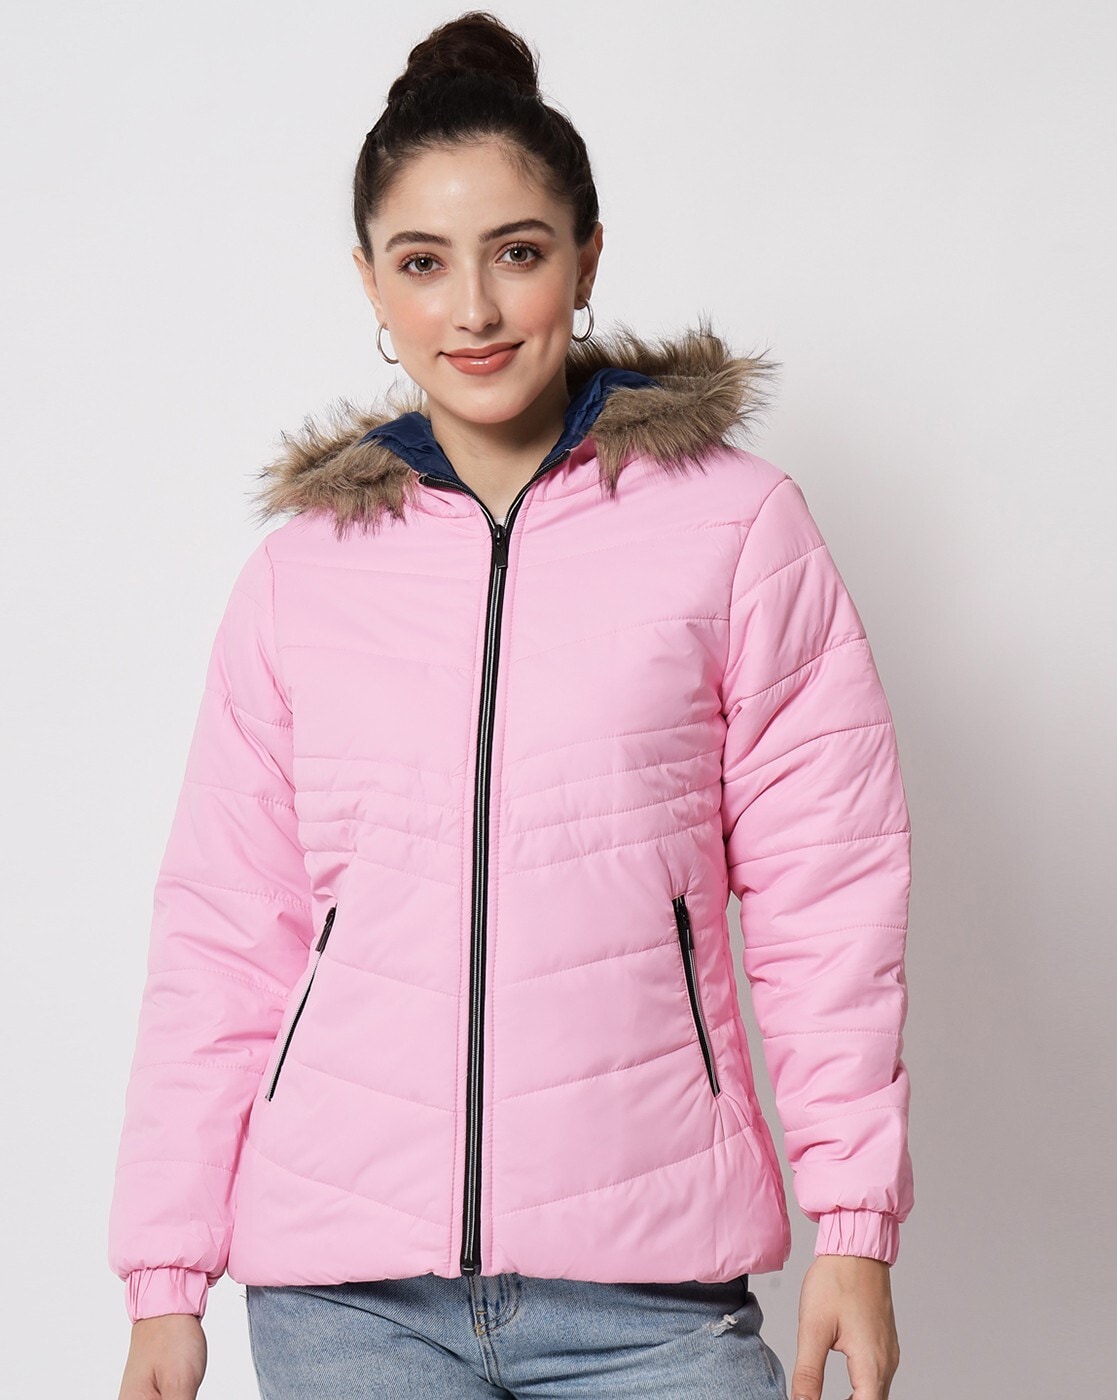 Girls' Pink Jackets & Outerwear | The North Face